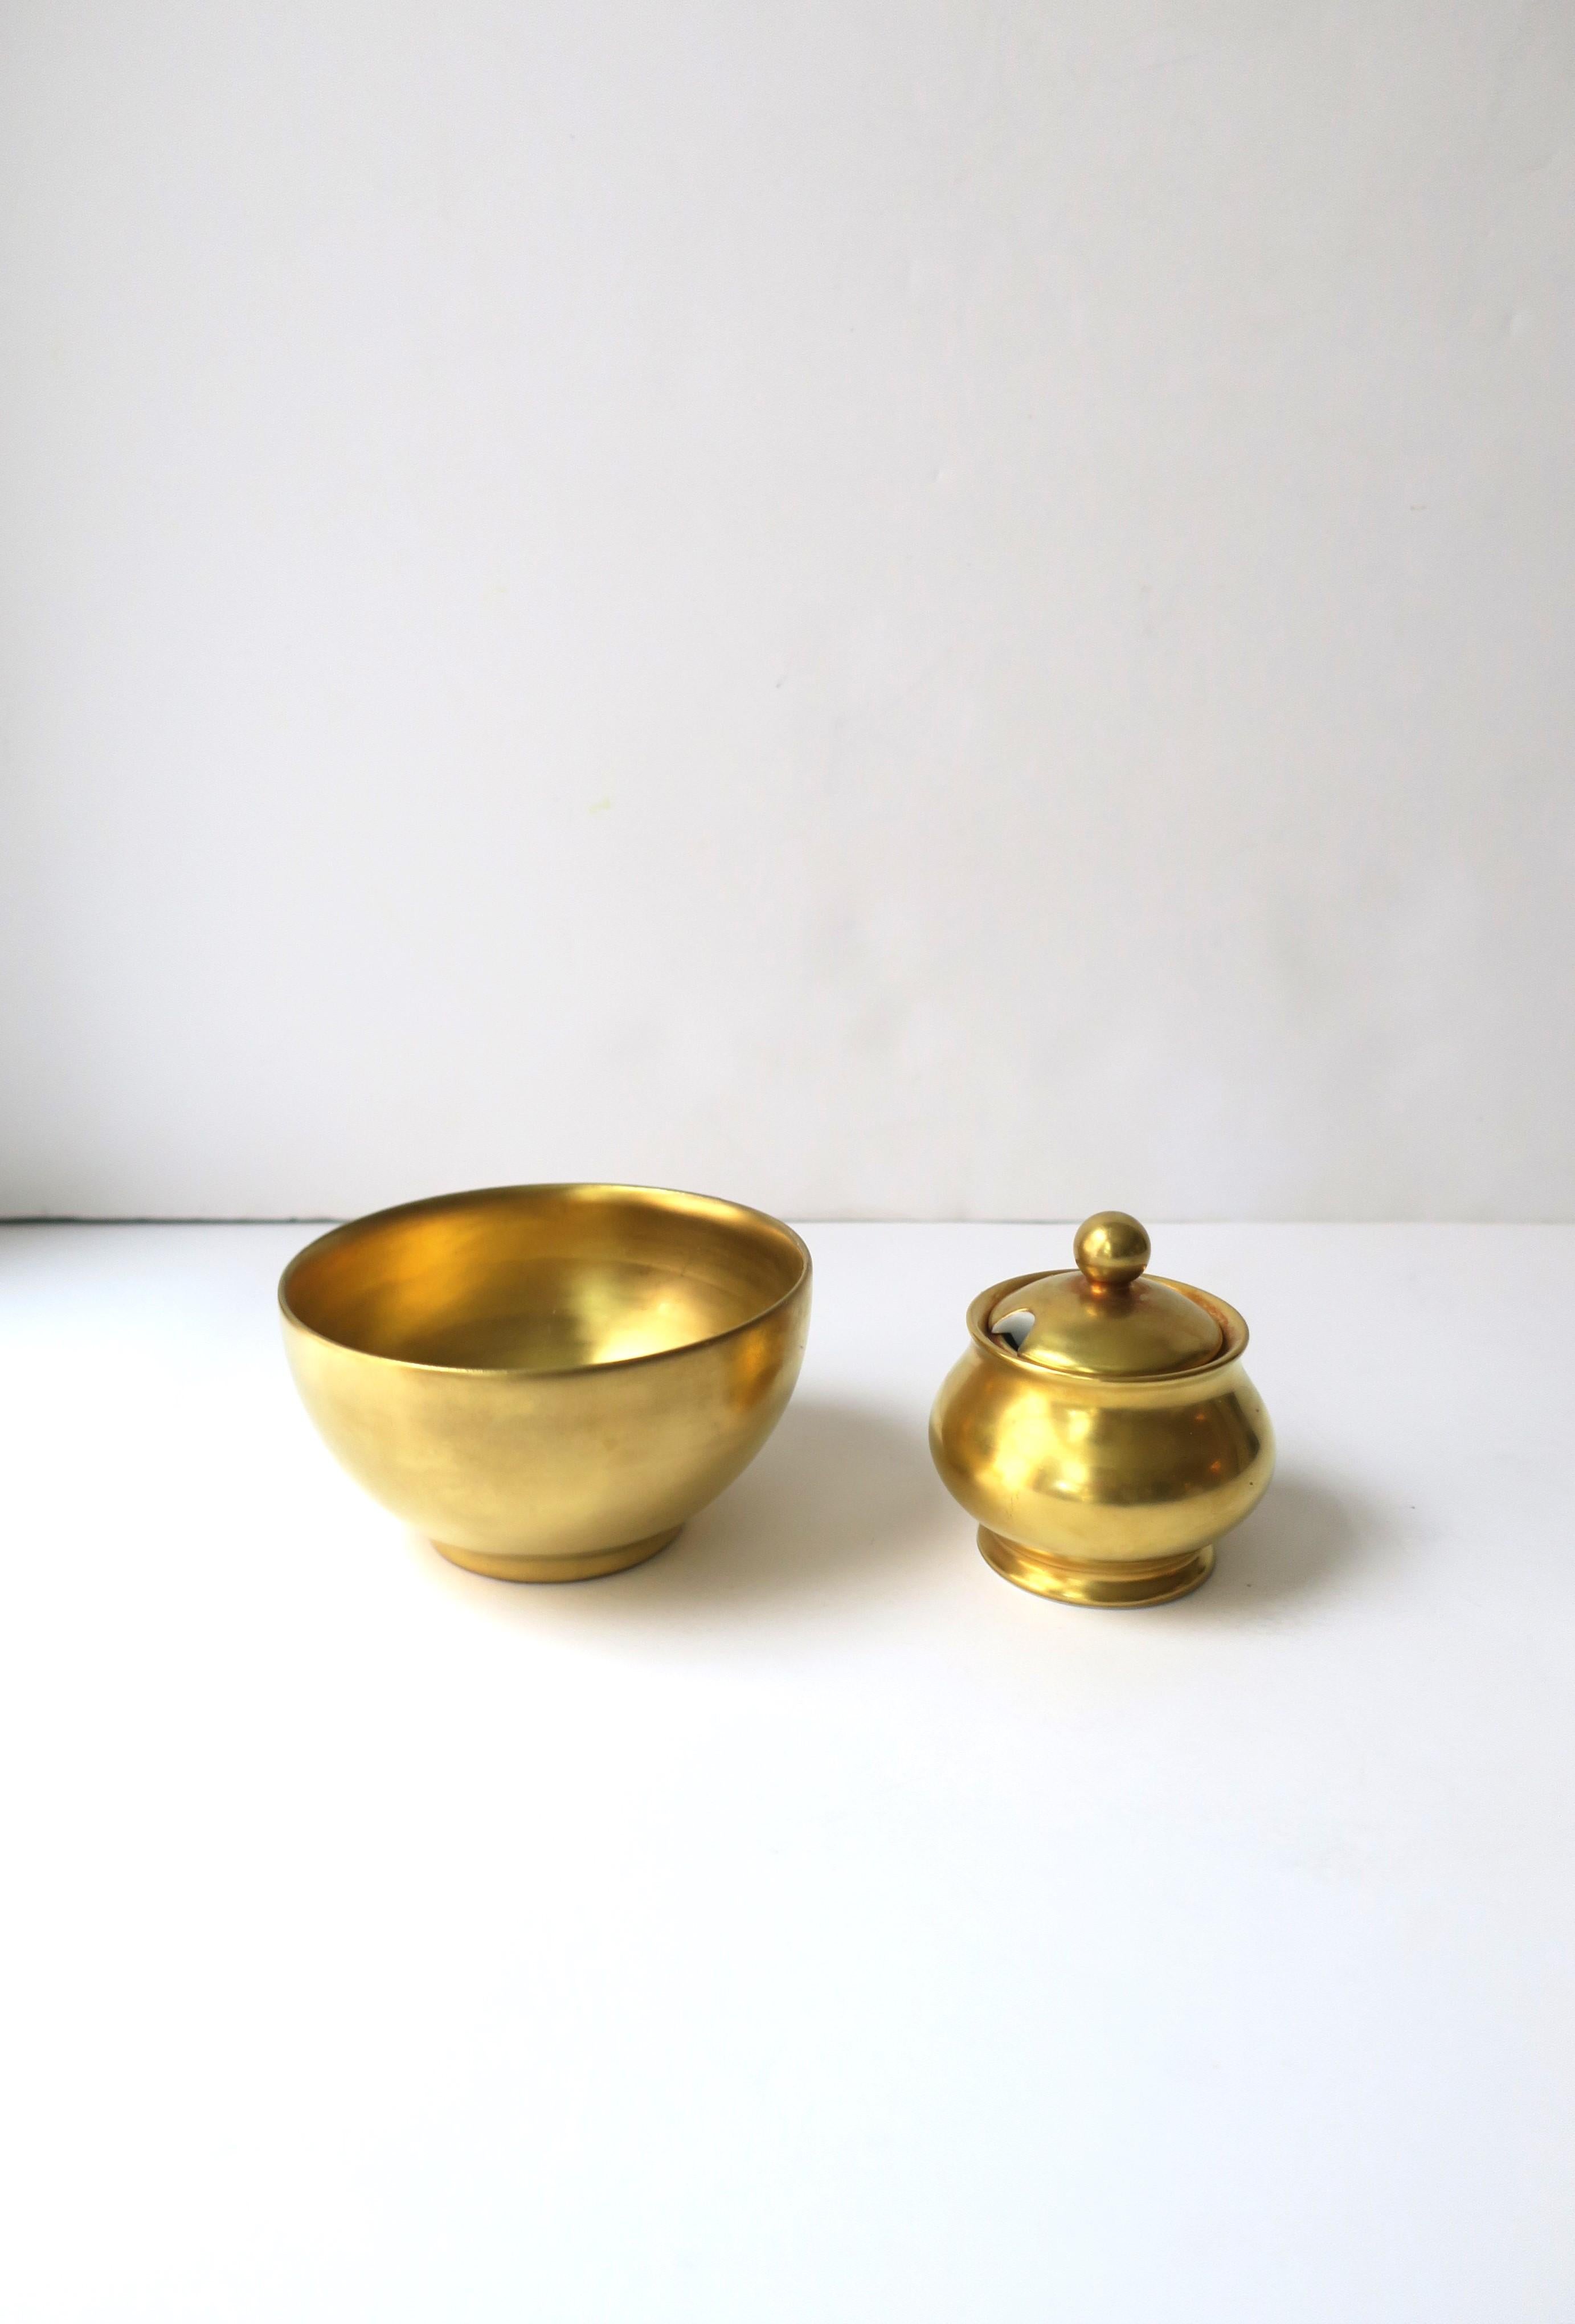 Takashimaya Gold Japanese Porcelain Condiments or Sugar Bowl  In Good Condition For Sale In New York, NY